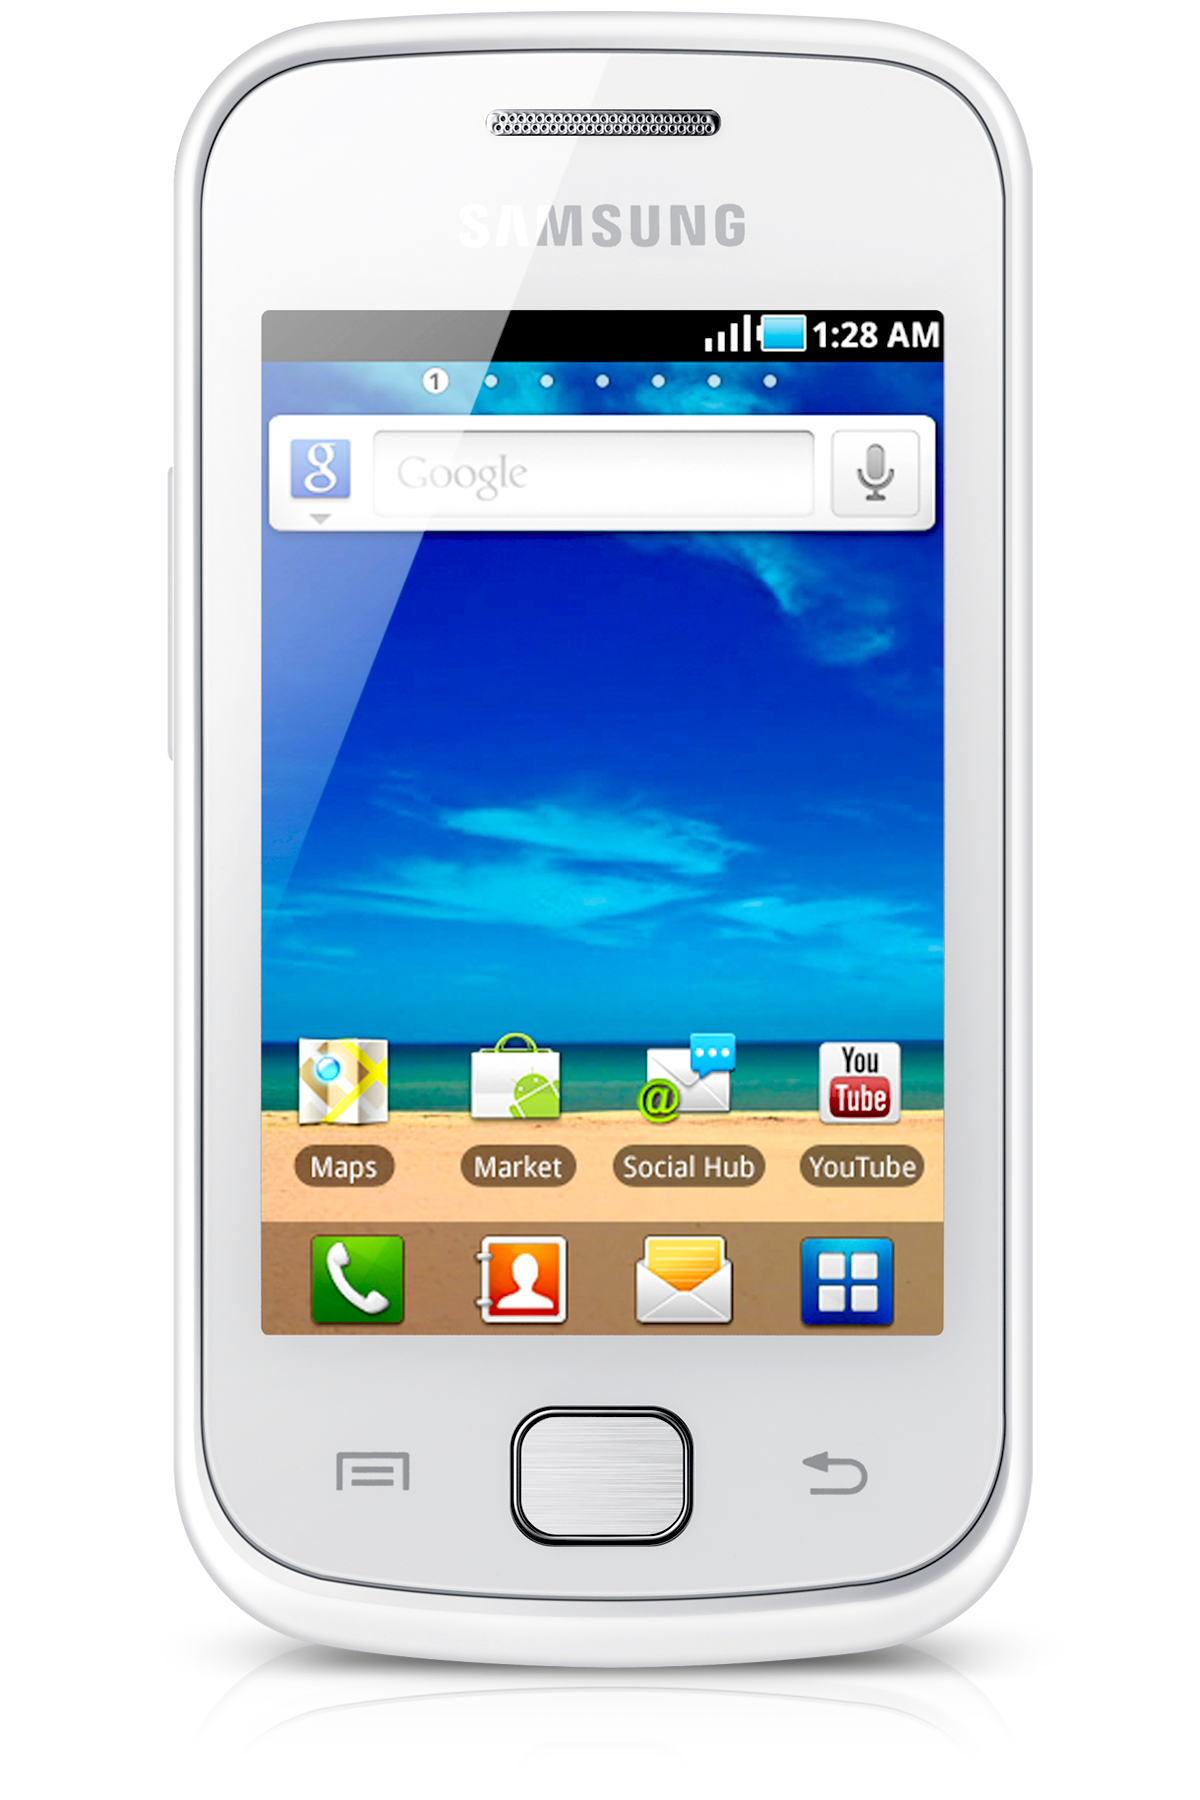 Galaxy Gio
S5660 Android